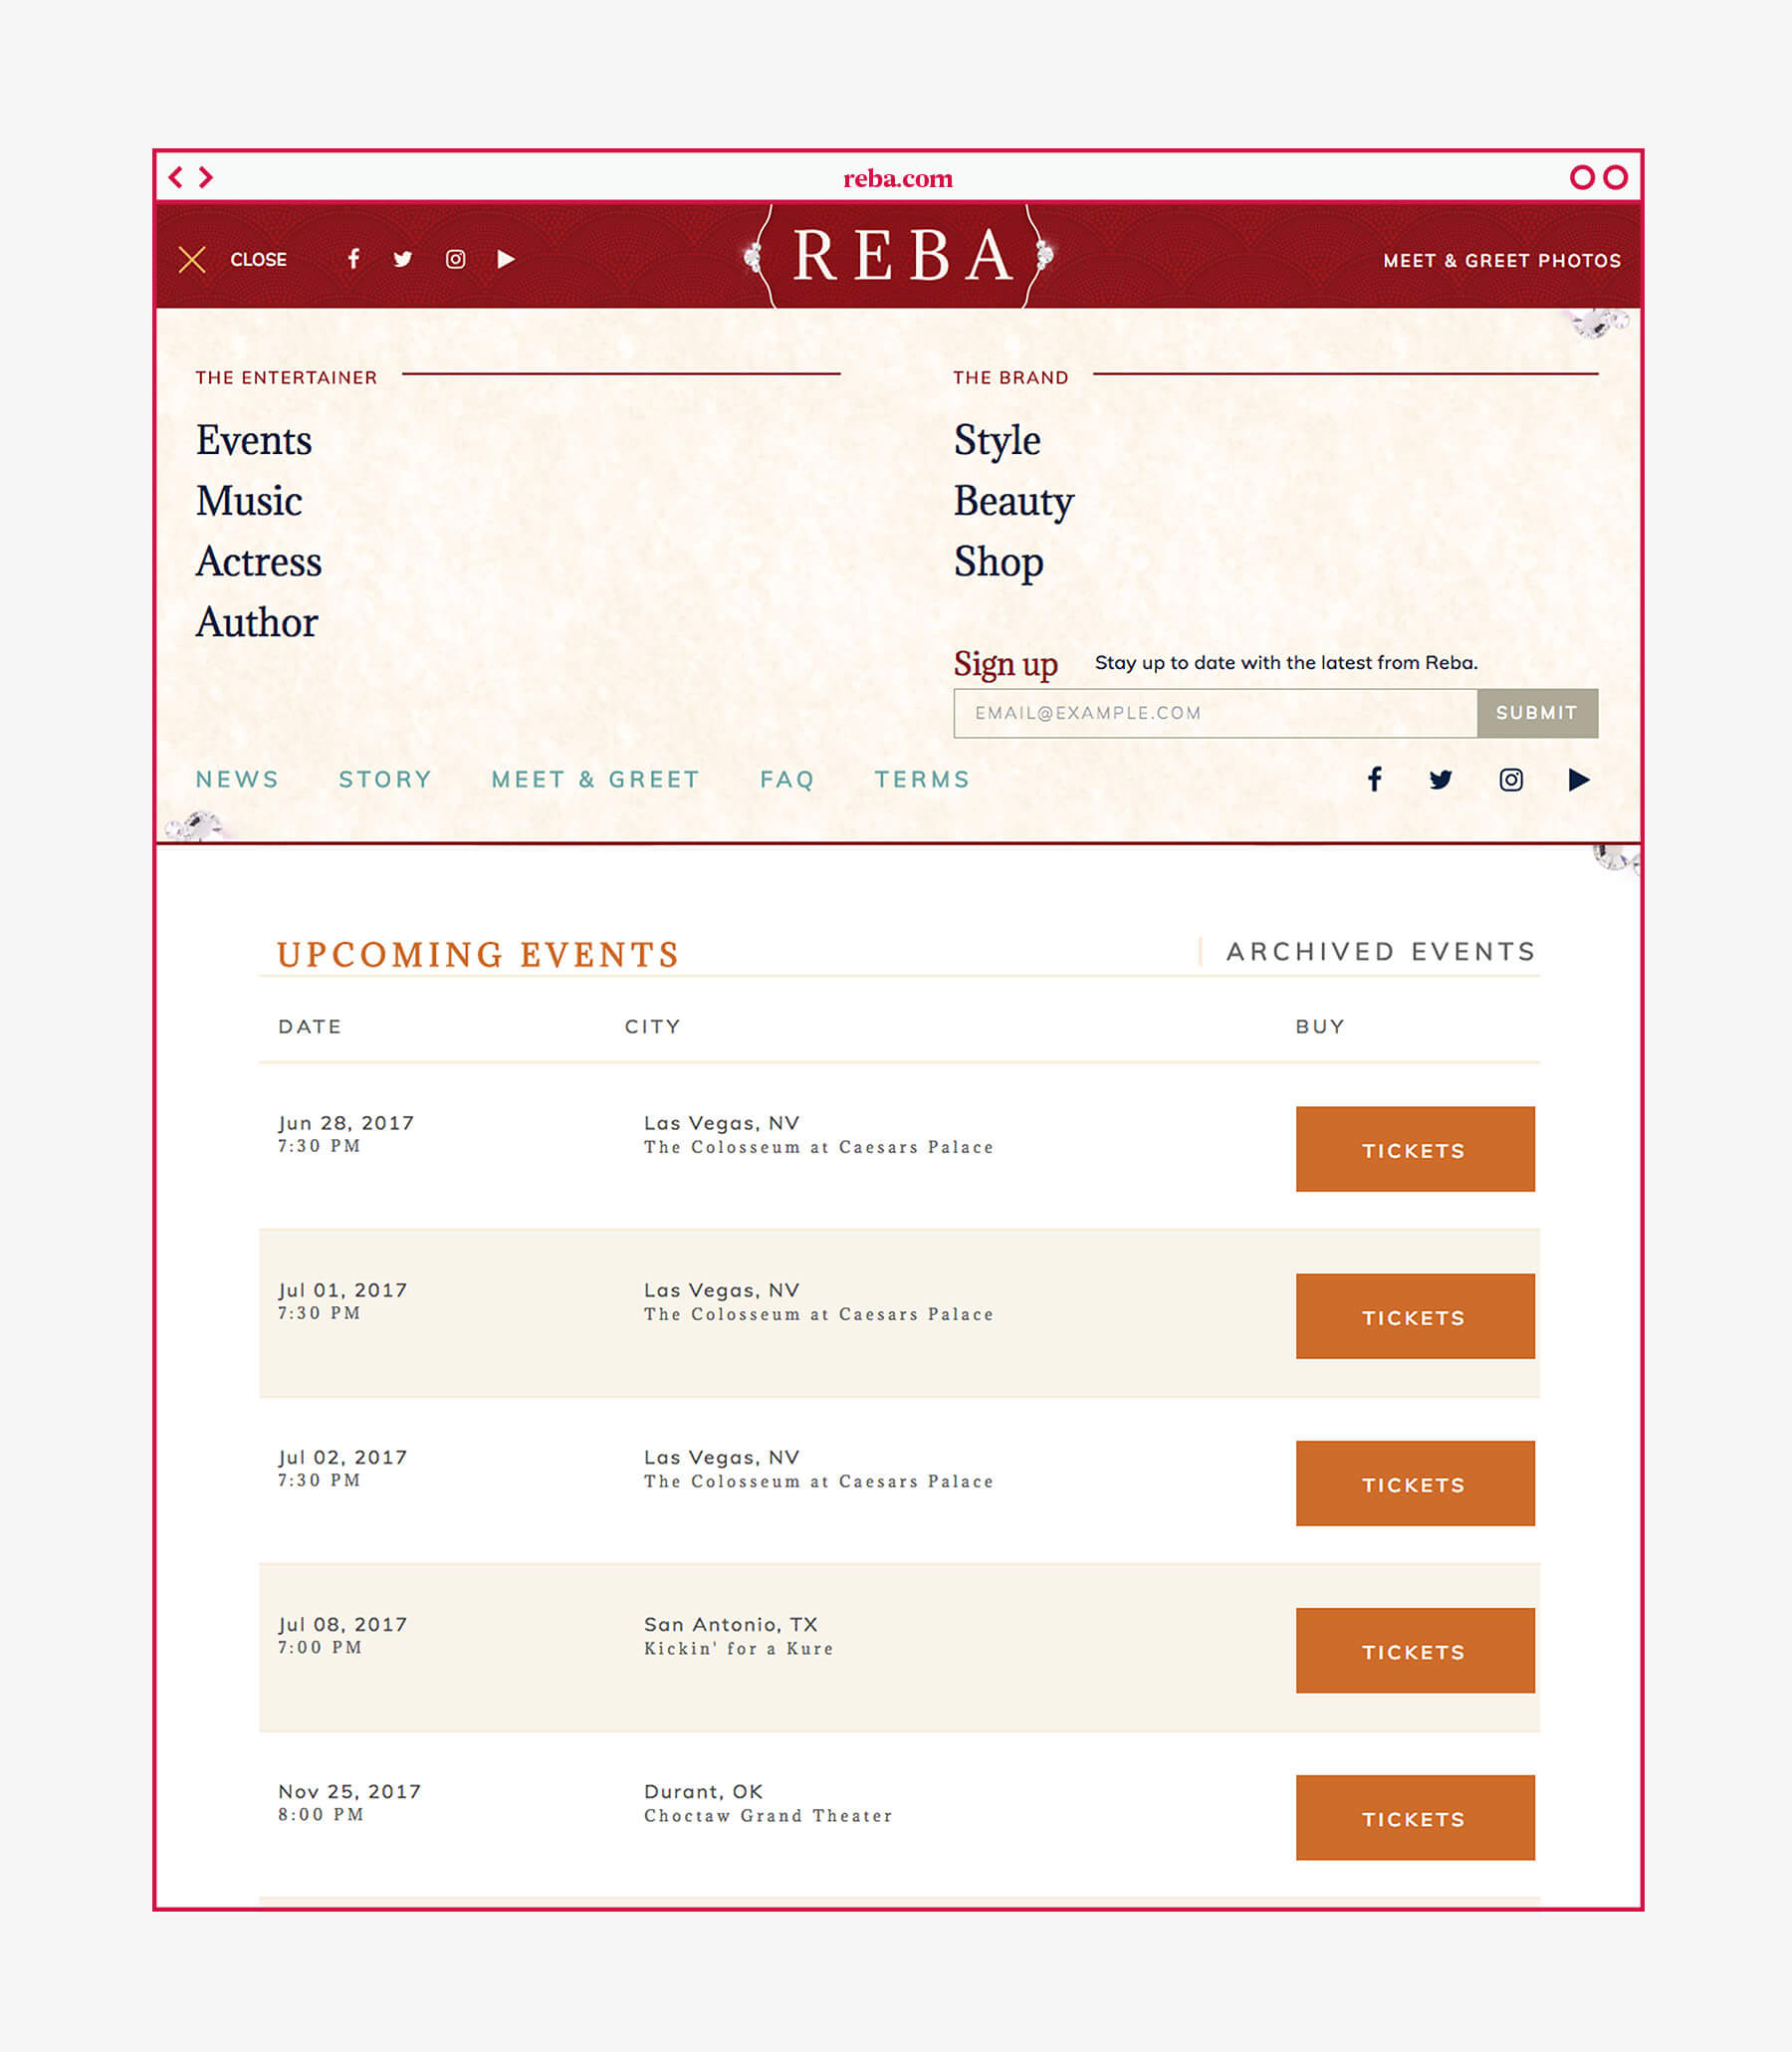 Image of the expanded navigation on the upcoming events page.